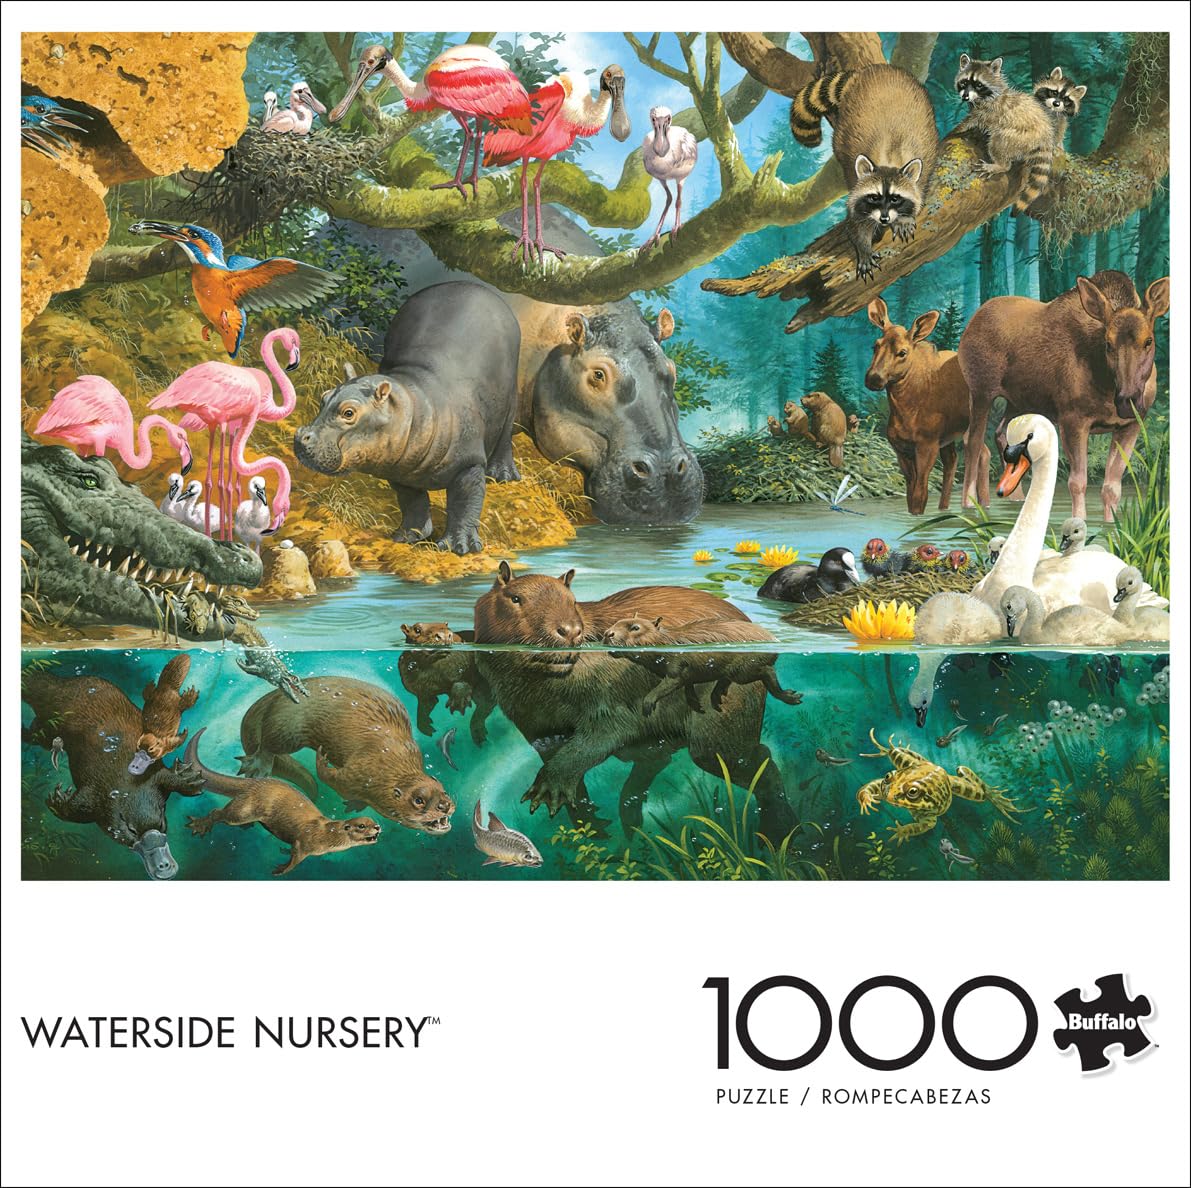 Buffalo Games - Waterside Nursery - 1000 Piece Jigsaw Puzzle for Adults Challenging Puzzle Perfect for Game Nights - Finished Size 26.75 x 19.75